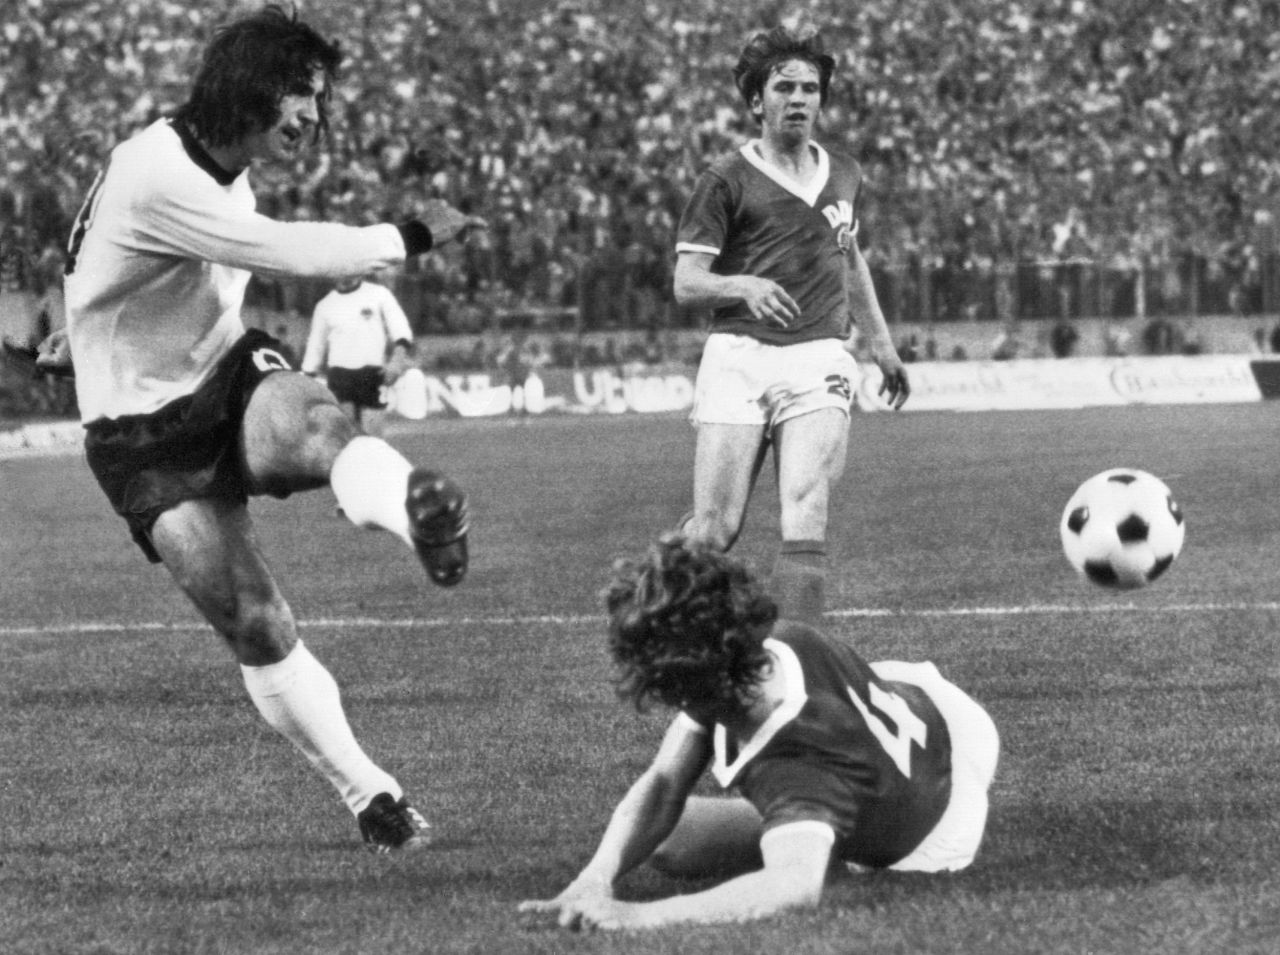 That feat was surpassed in 1972 by Muller, who scored 85 goals as West Germany won the European Championship and his club Bayern Munich lifted the Bundesliga title.